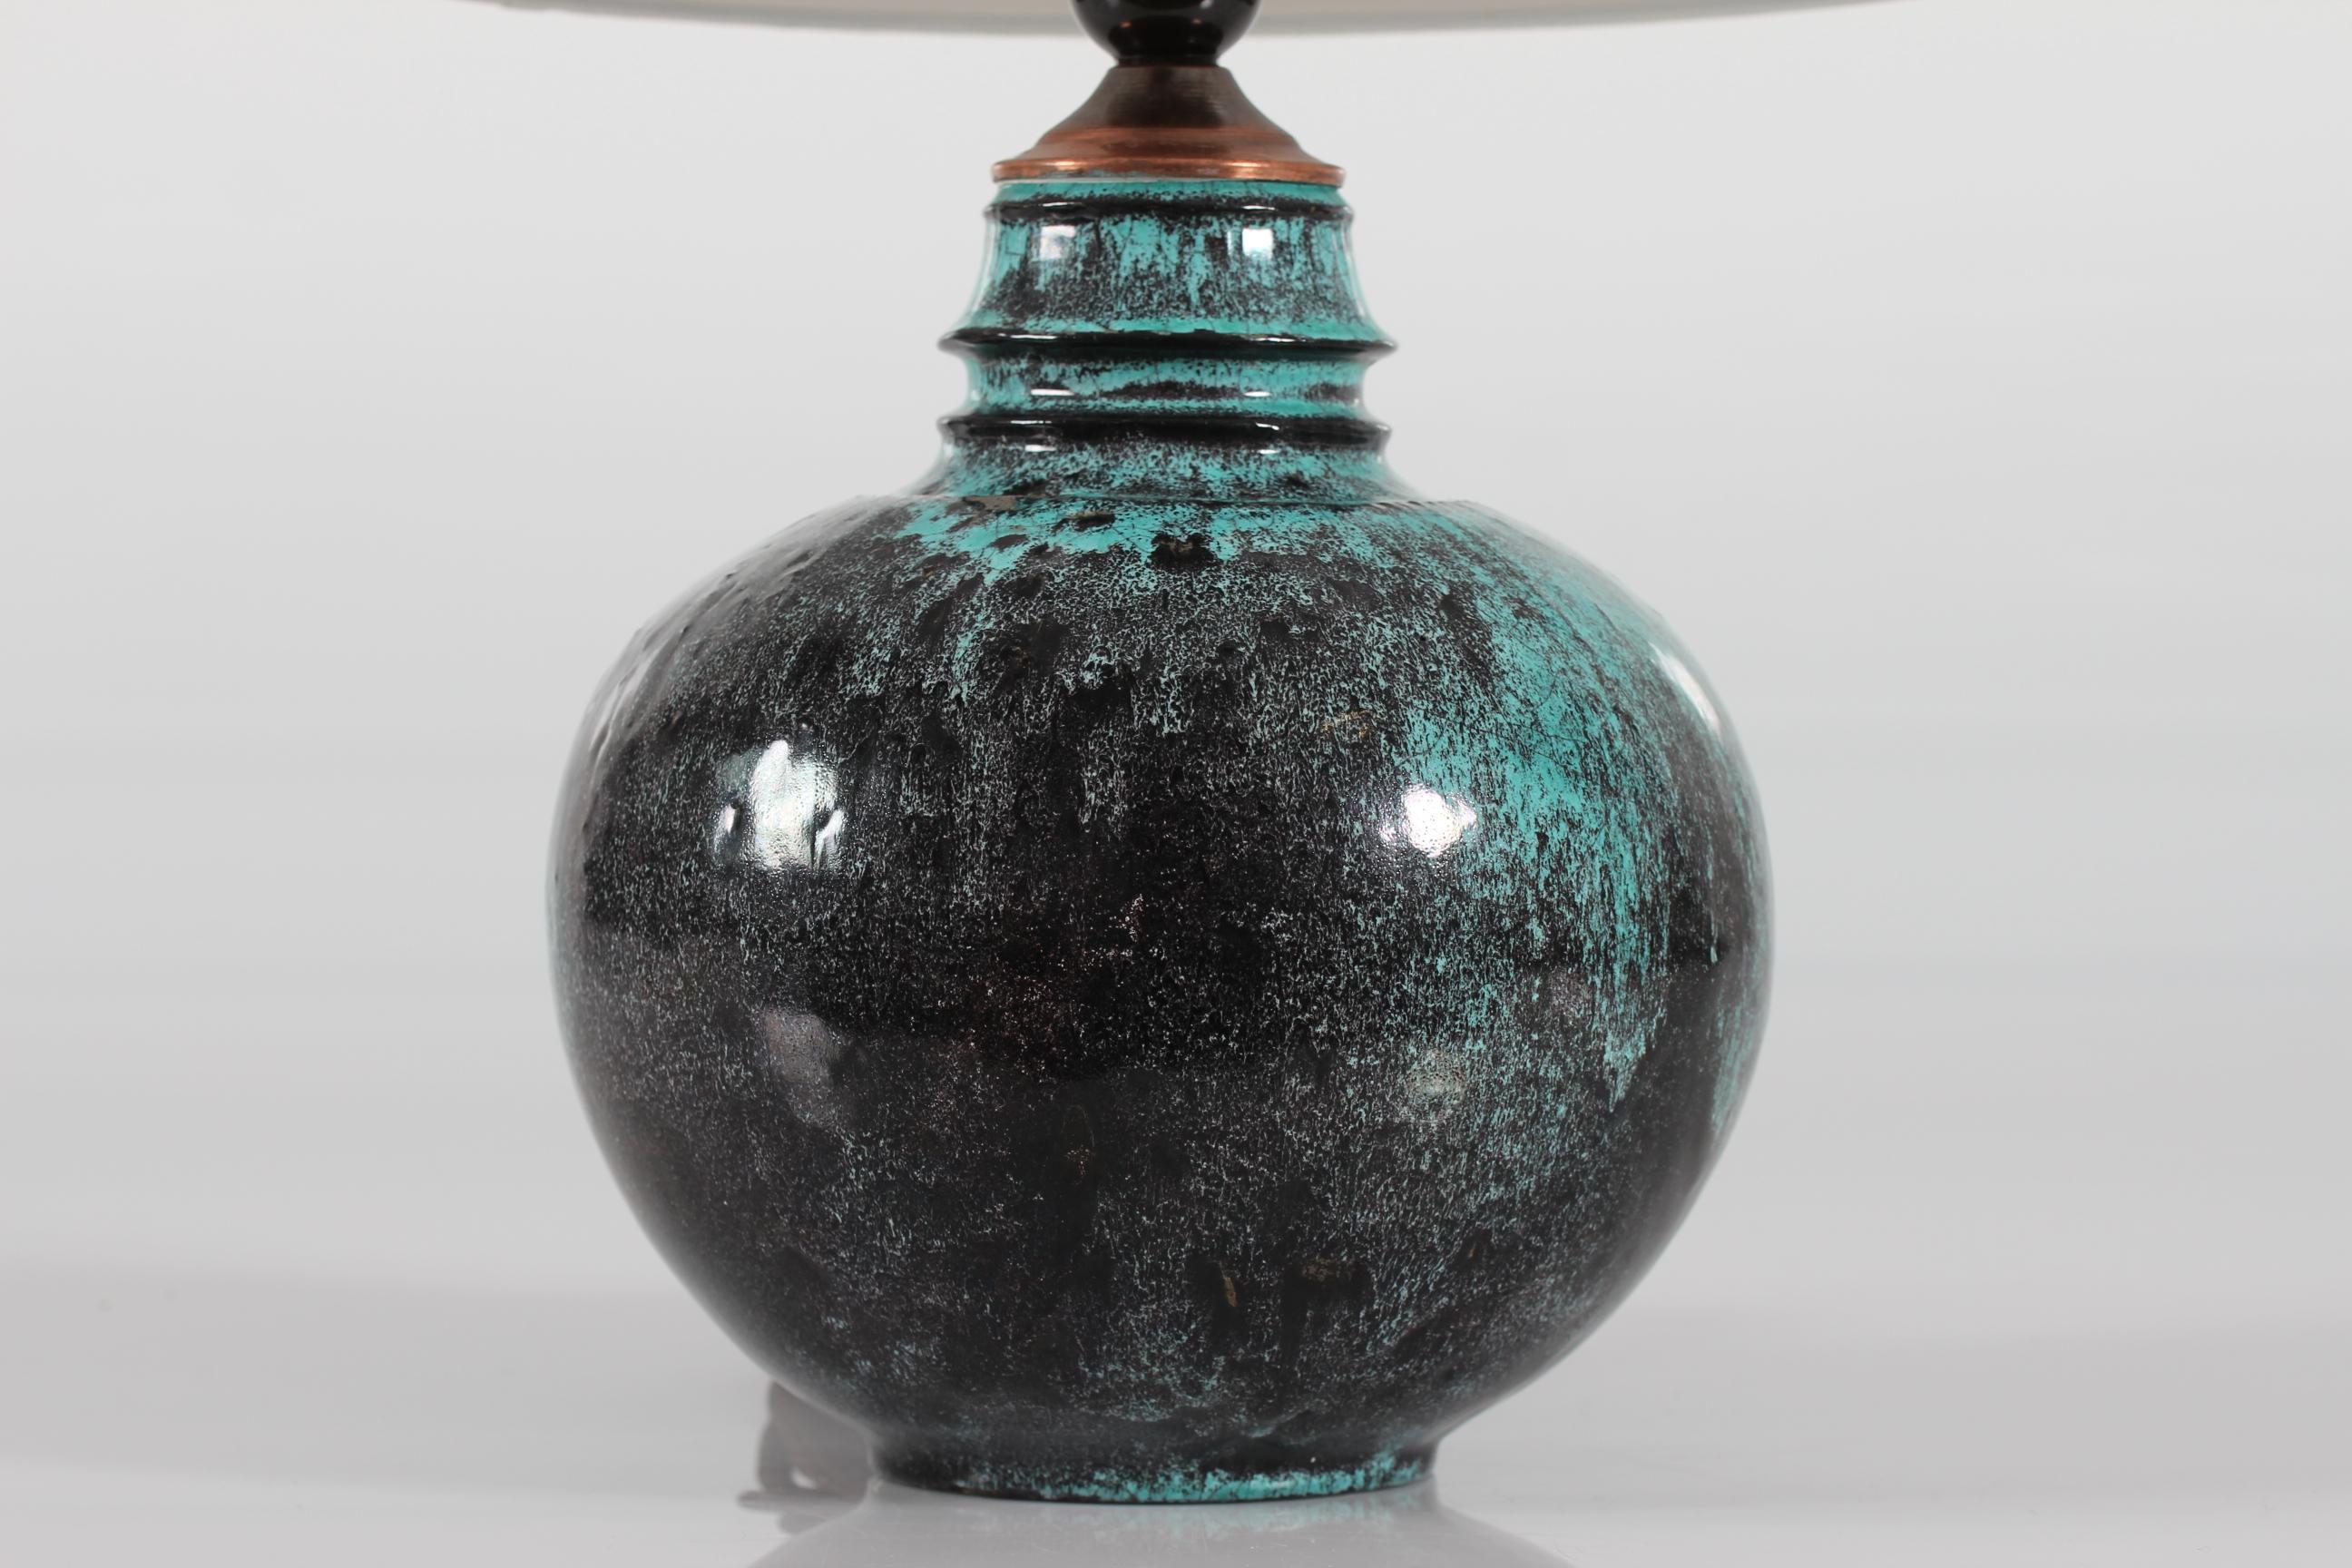 Rare Table lamp designed by Svend Hammershøi.
It's made by Herman A. Kählers ceramic workshop in Denmark in the 1930s

The artist Svend Hammershøi (1873-1948) was both a draftsman, a painter and a ceramist. 
He worked for Kähler from 1893 to